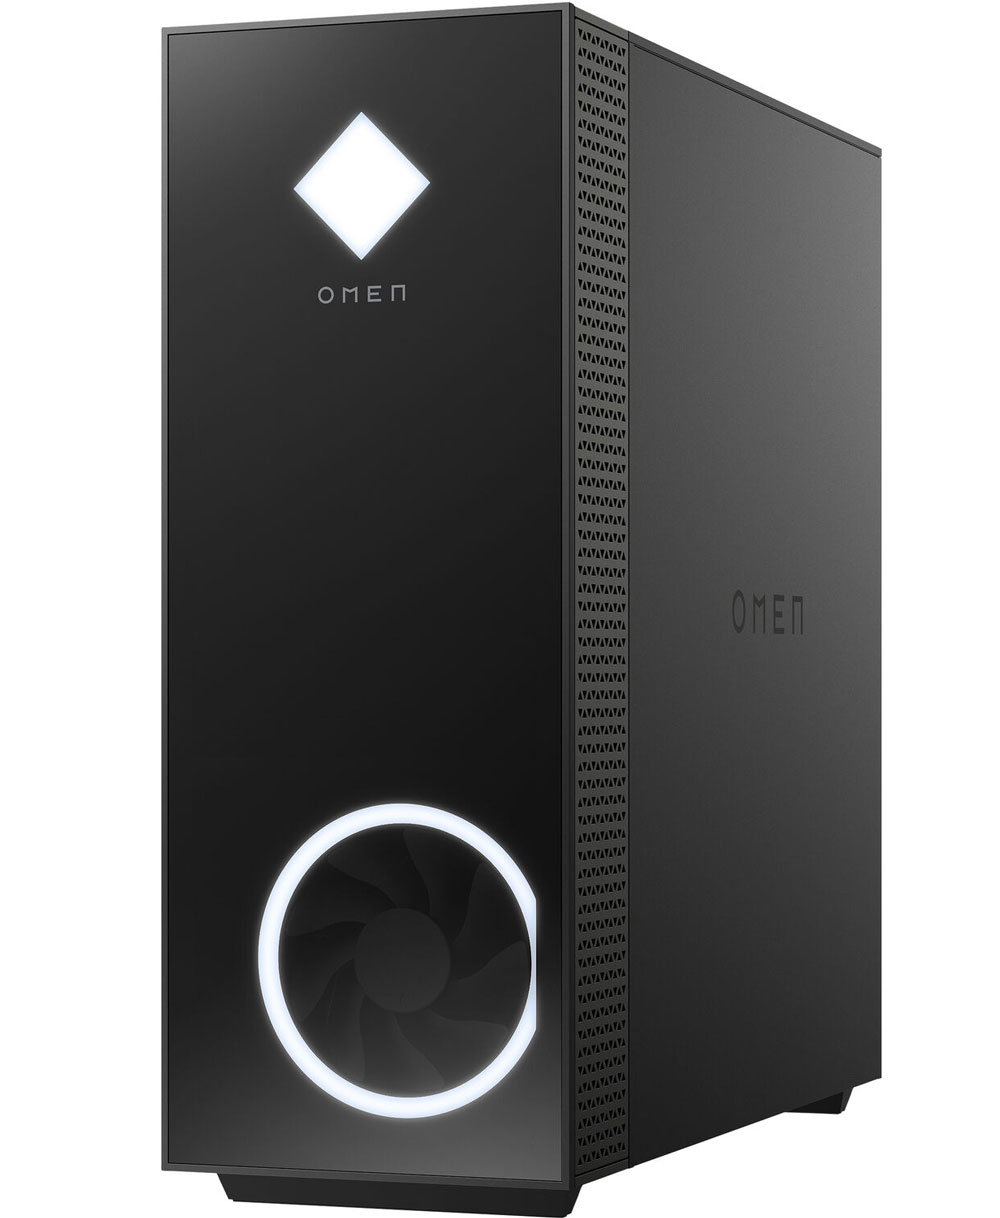 HP OMEN 30L Core i7 RTX 3080 Gaming Desktop PC With 4TB SSD